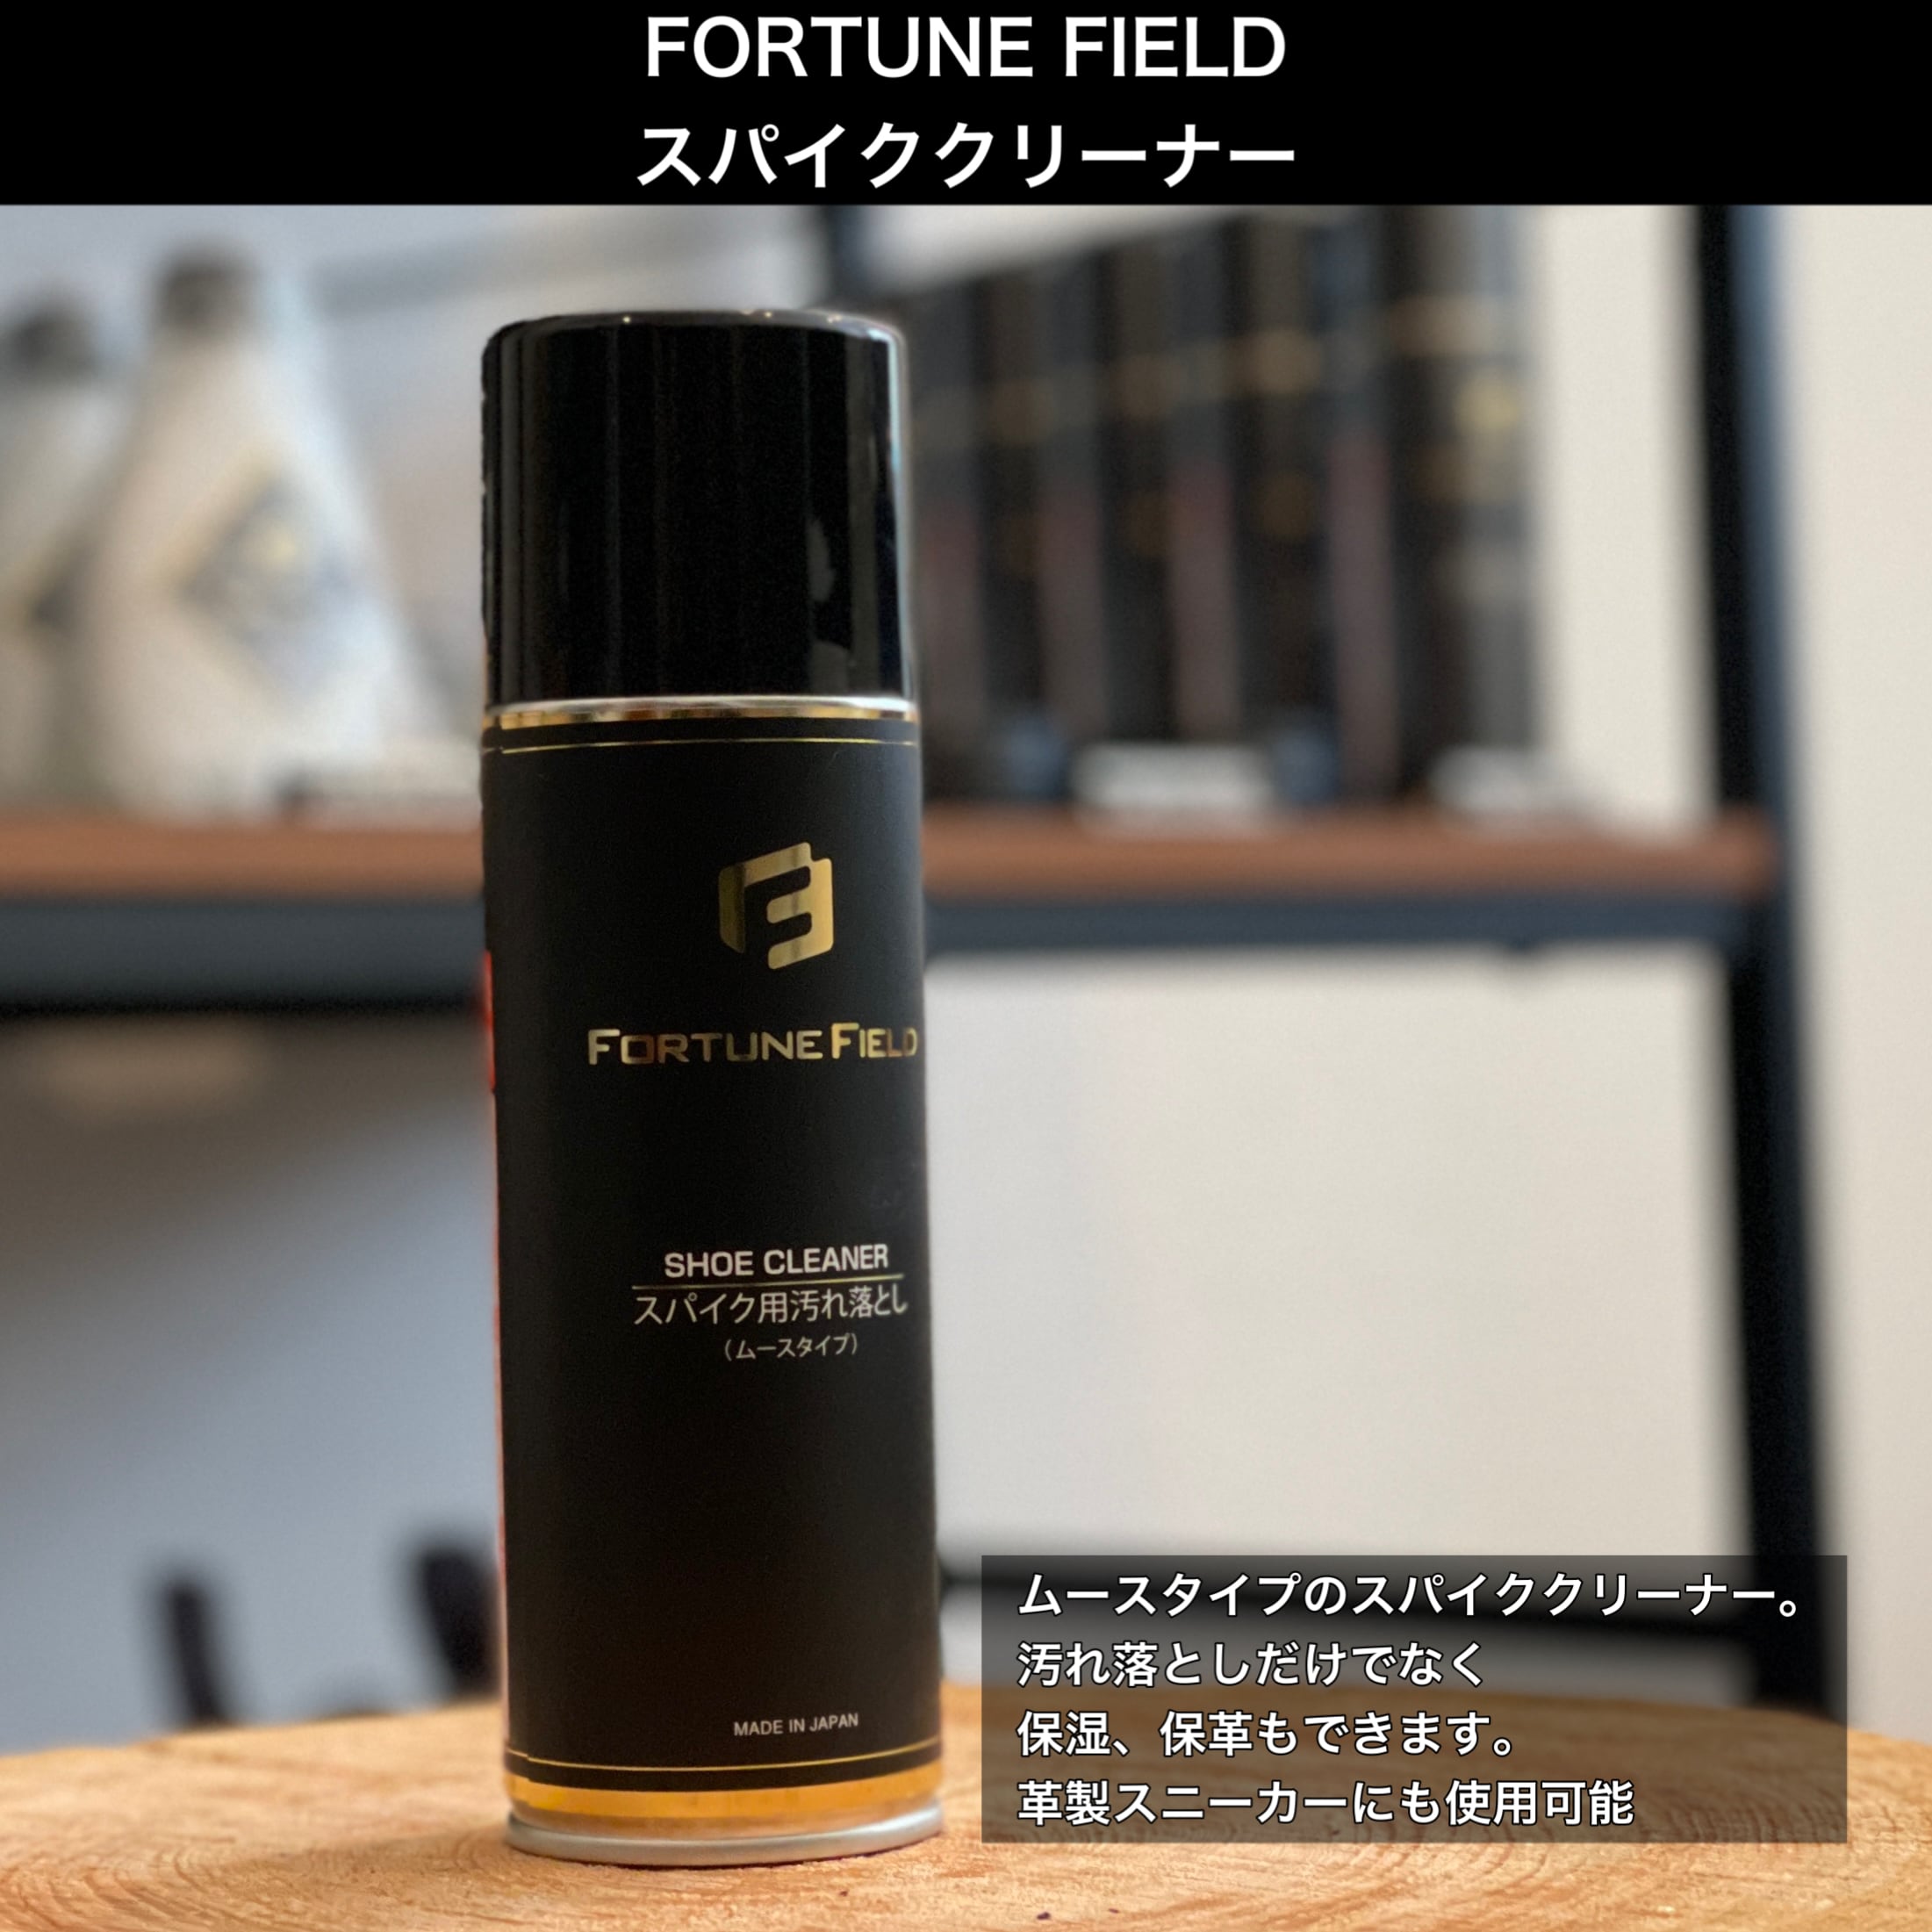 FORTUNE FIELD スパイククリーナー | 靴磨きとグラブ磨きのお店Wonderful Place powered by BASE